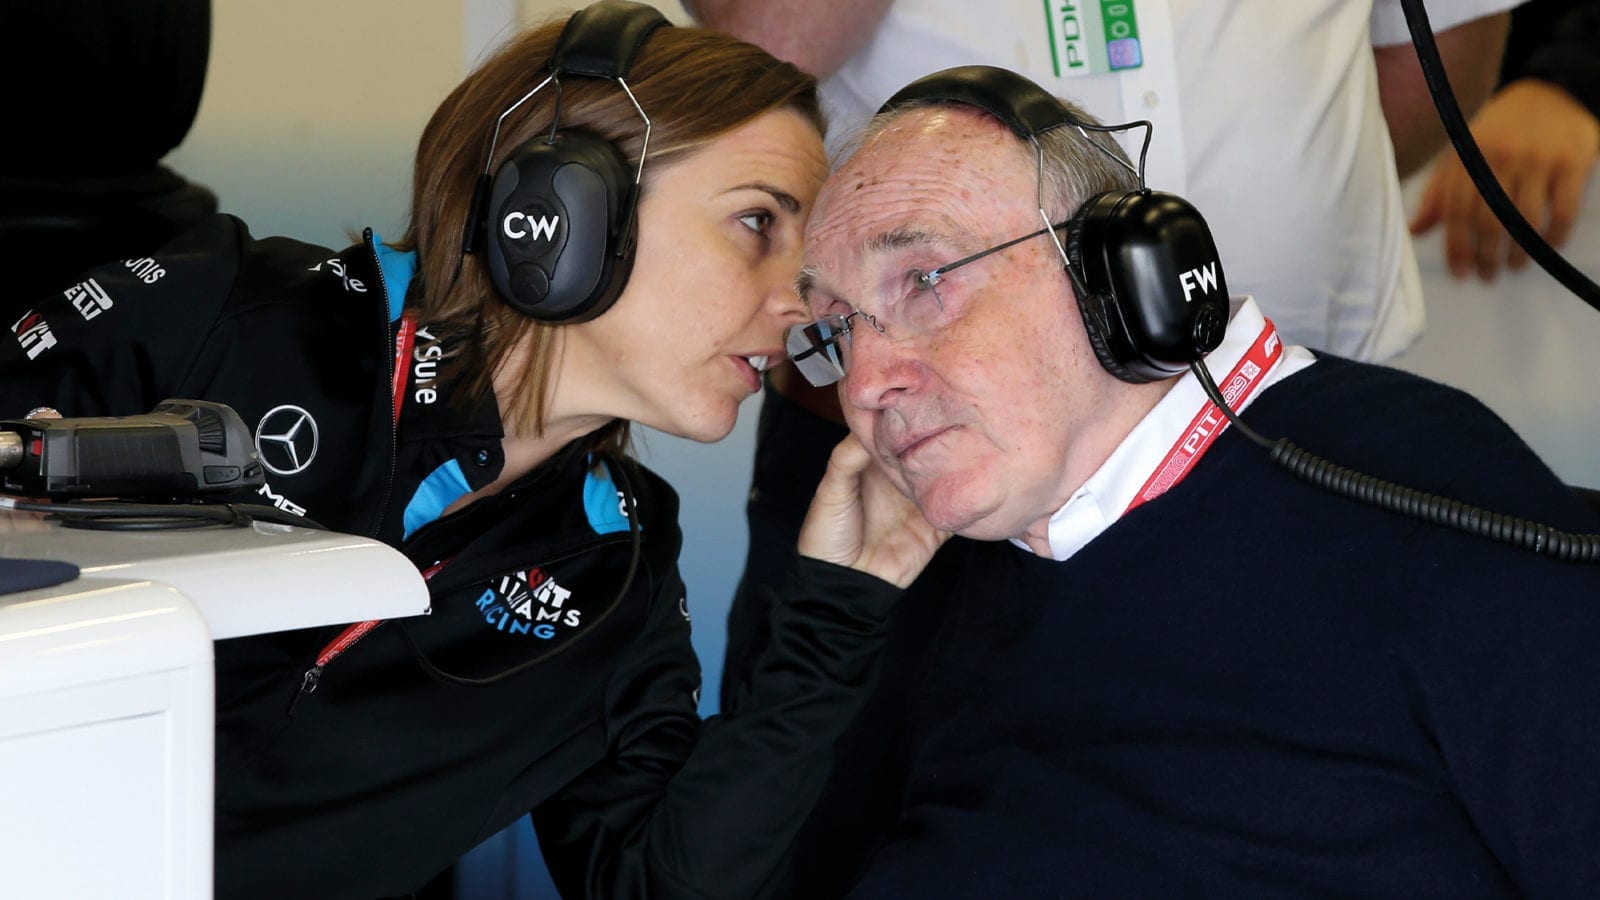 Claire Williams speaks to Frank Williams